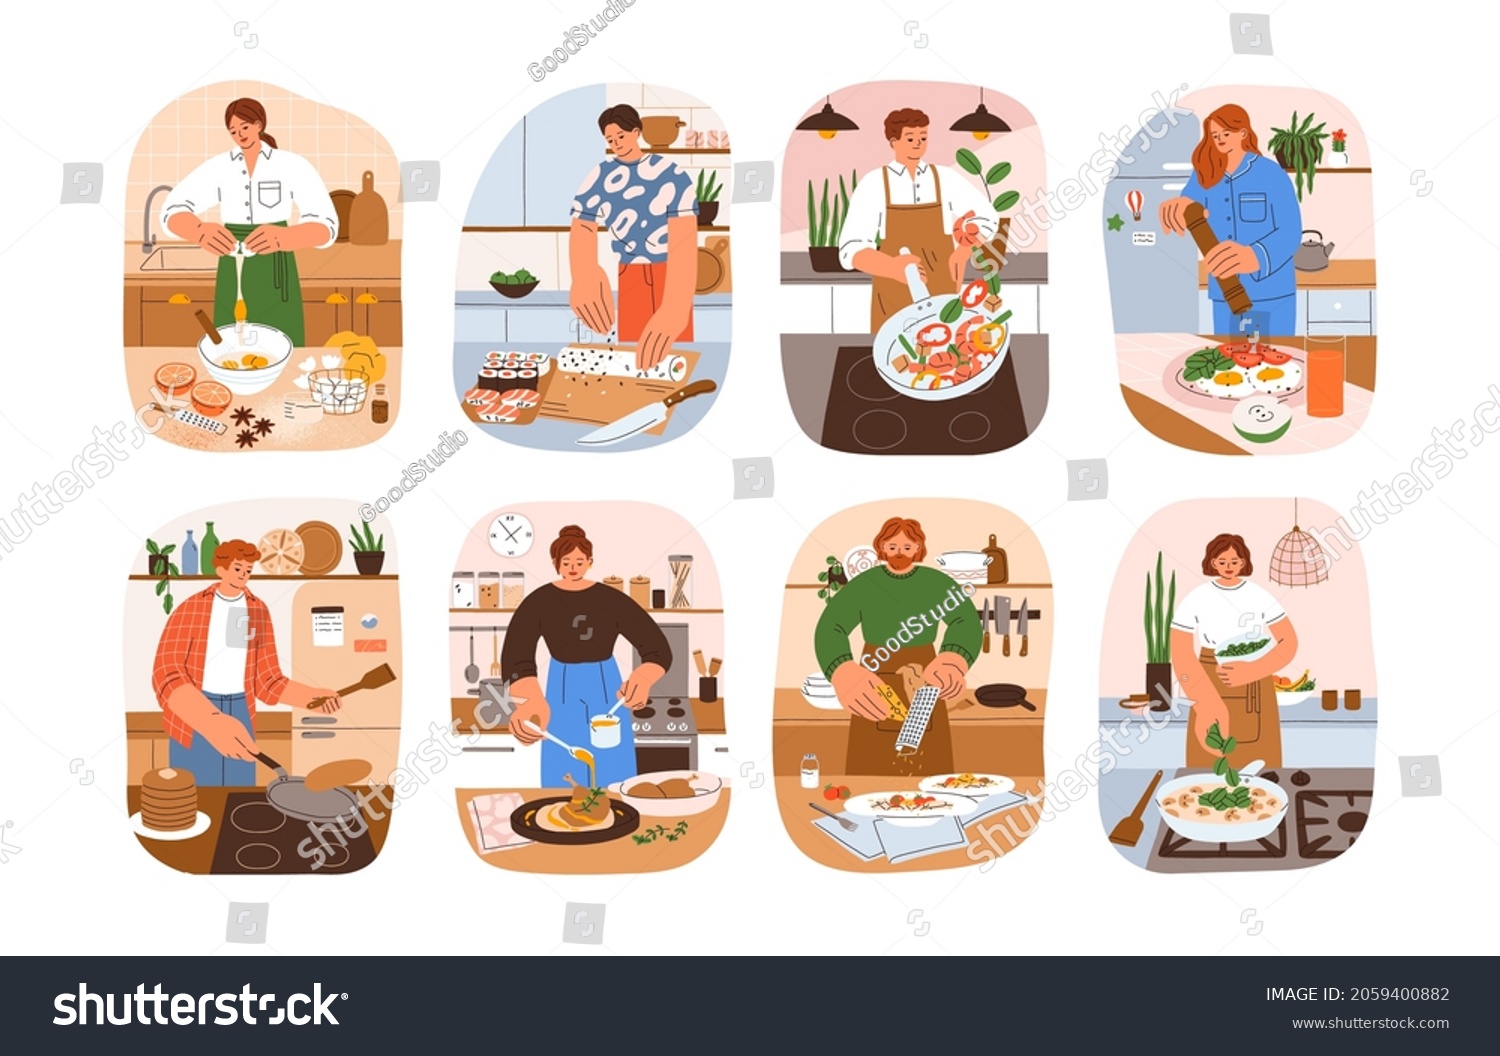 SVG of People cook food at home set. Men and women at kitchen table cooking breakfast, lunch, dinner dishes, preparing sushi, pasta, cake and turkey. Flat vector illustration isolated on white background svg